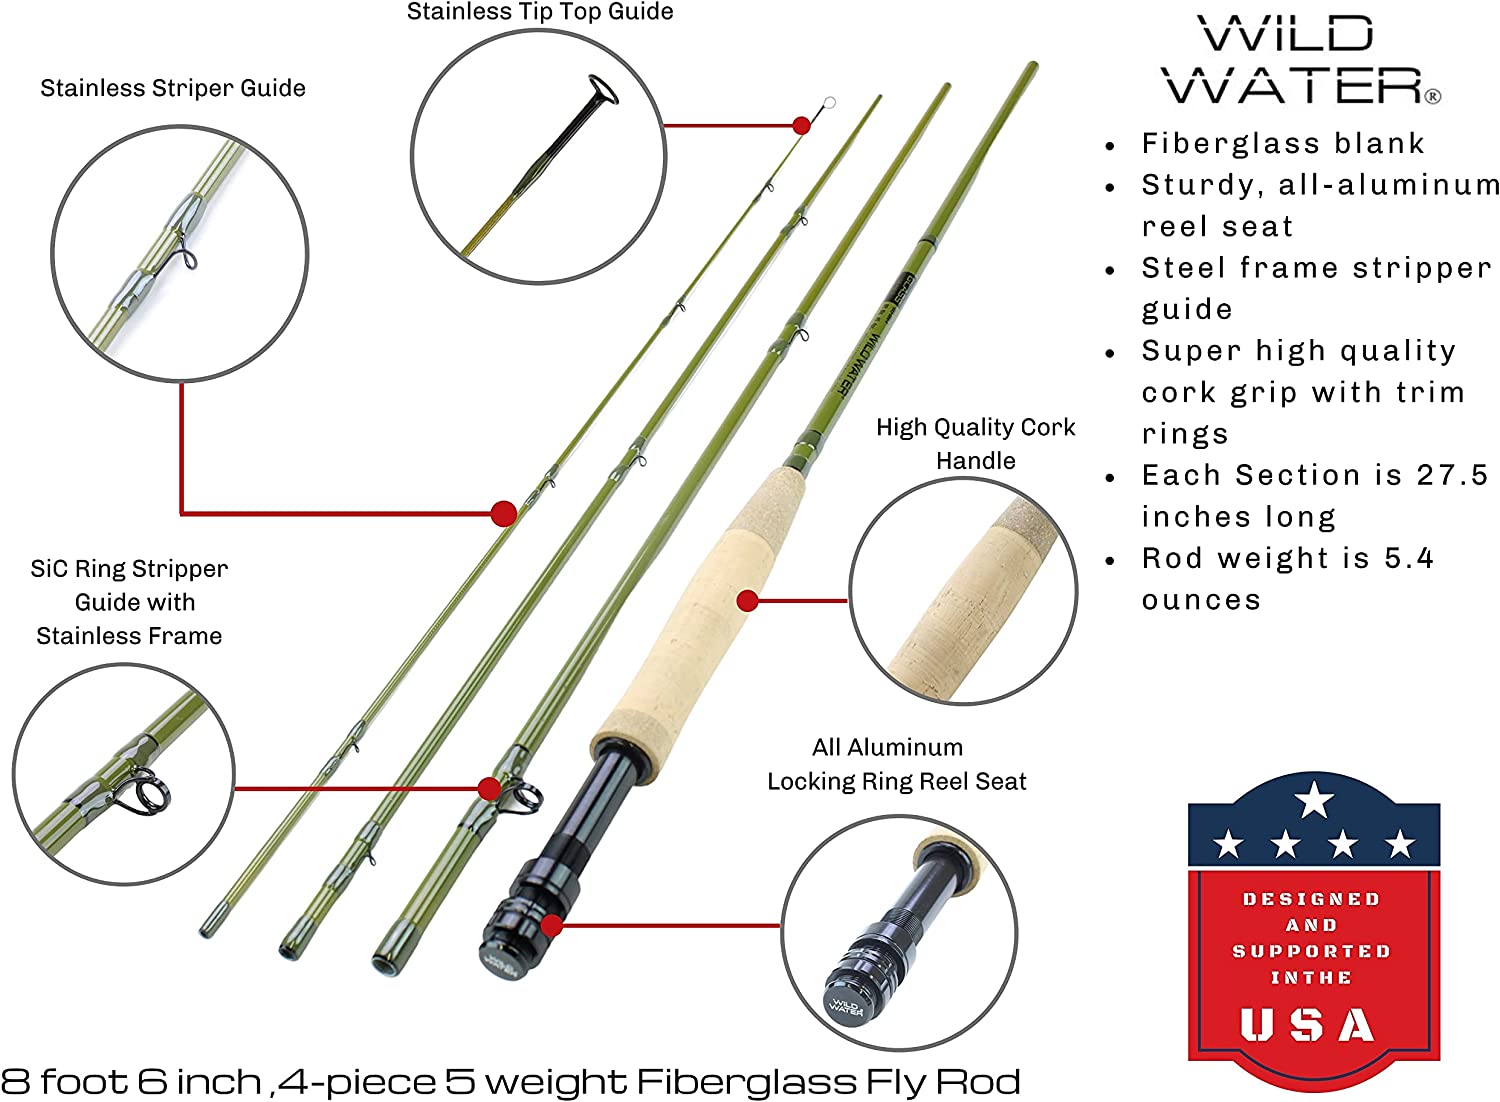 Wild Water Fly Fishing Combo with Fiberglass Rod 8 ft 6 in, 4-Piece, 5 wt